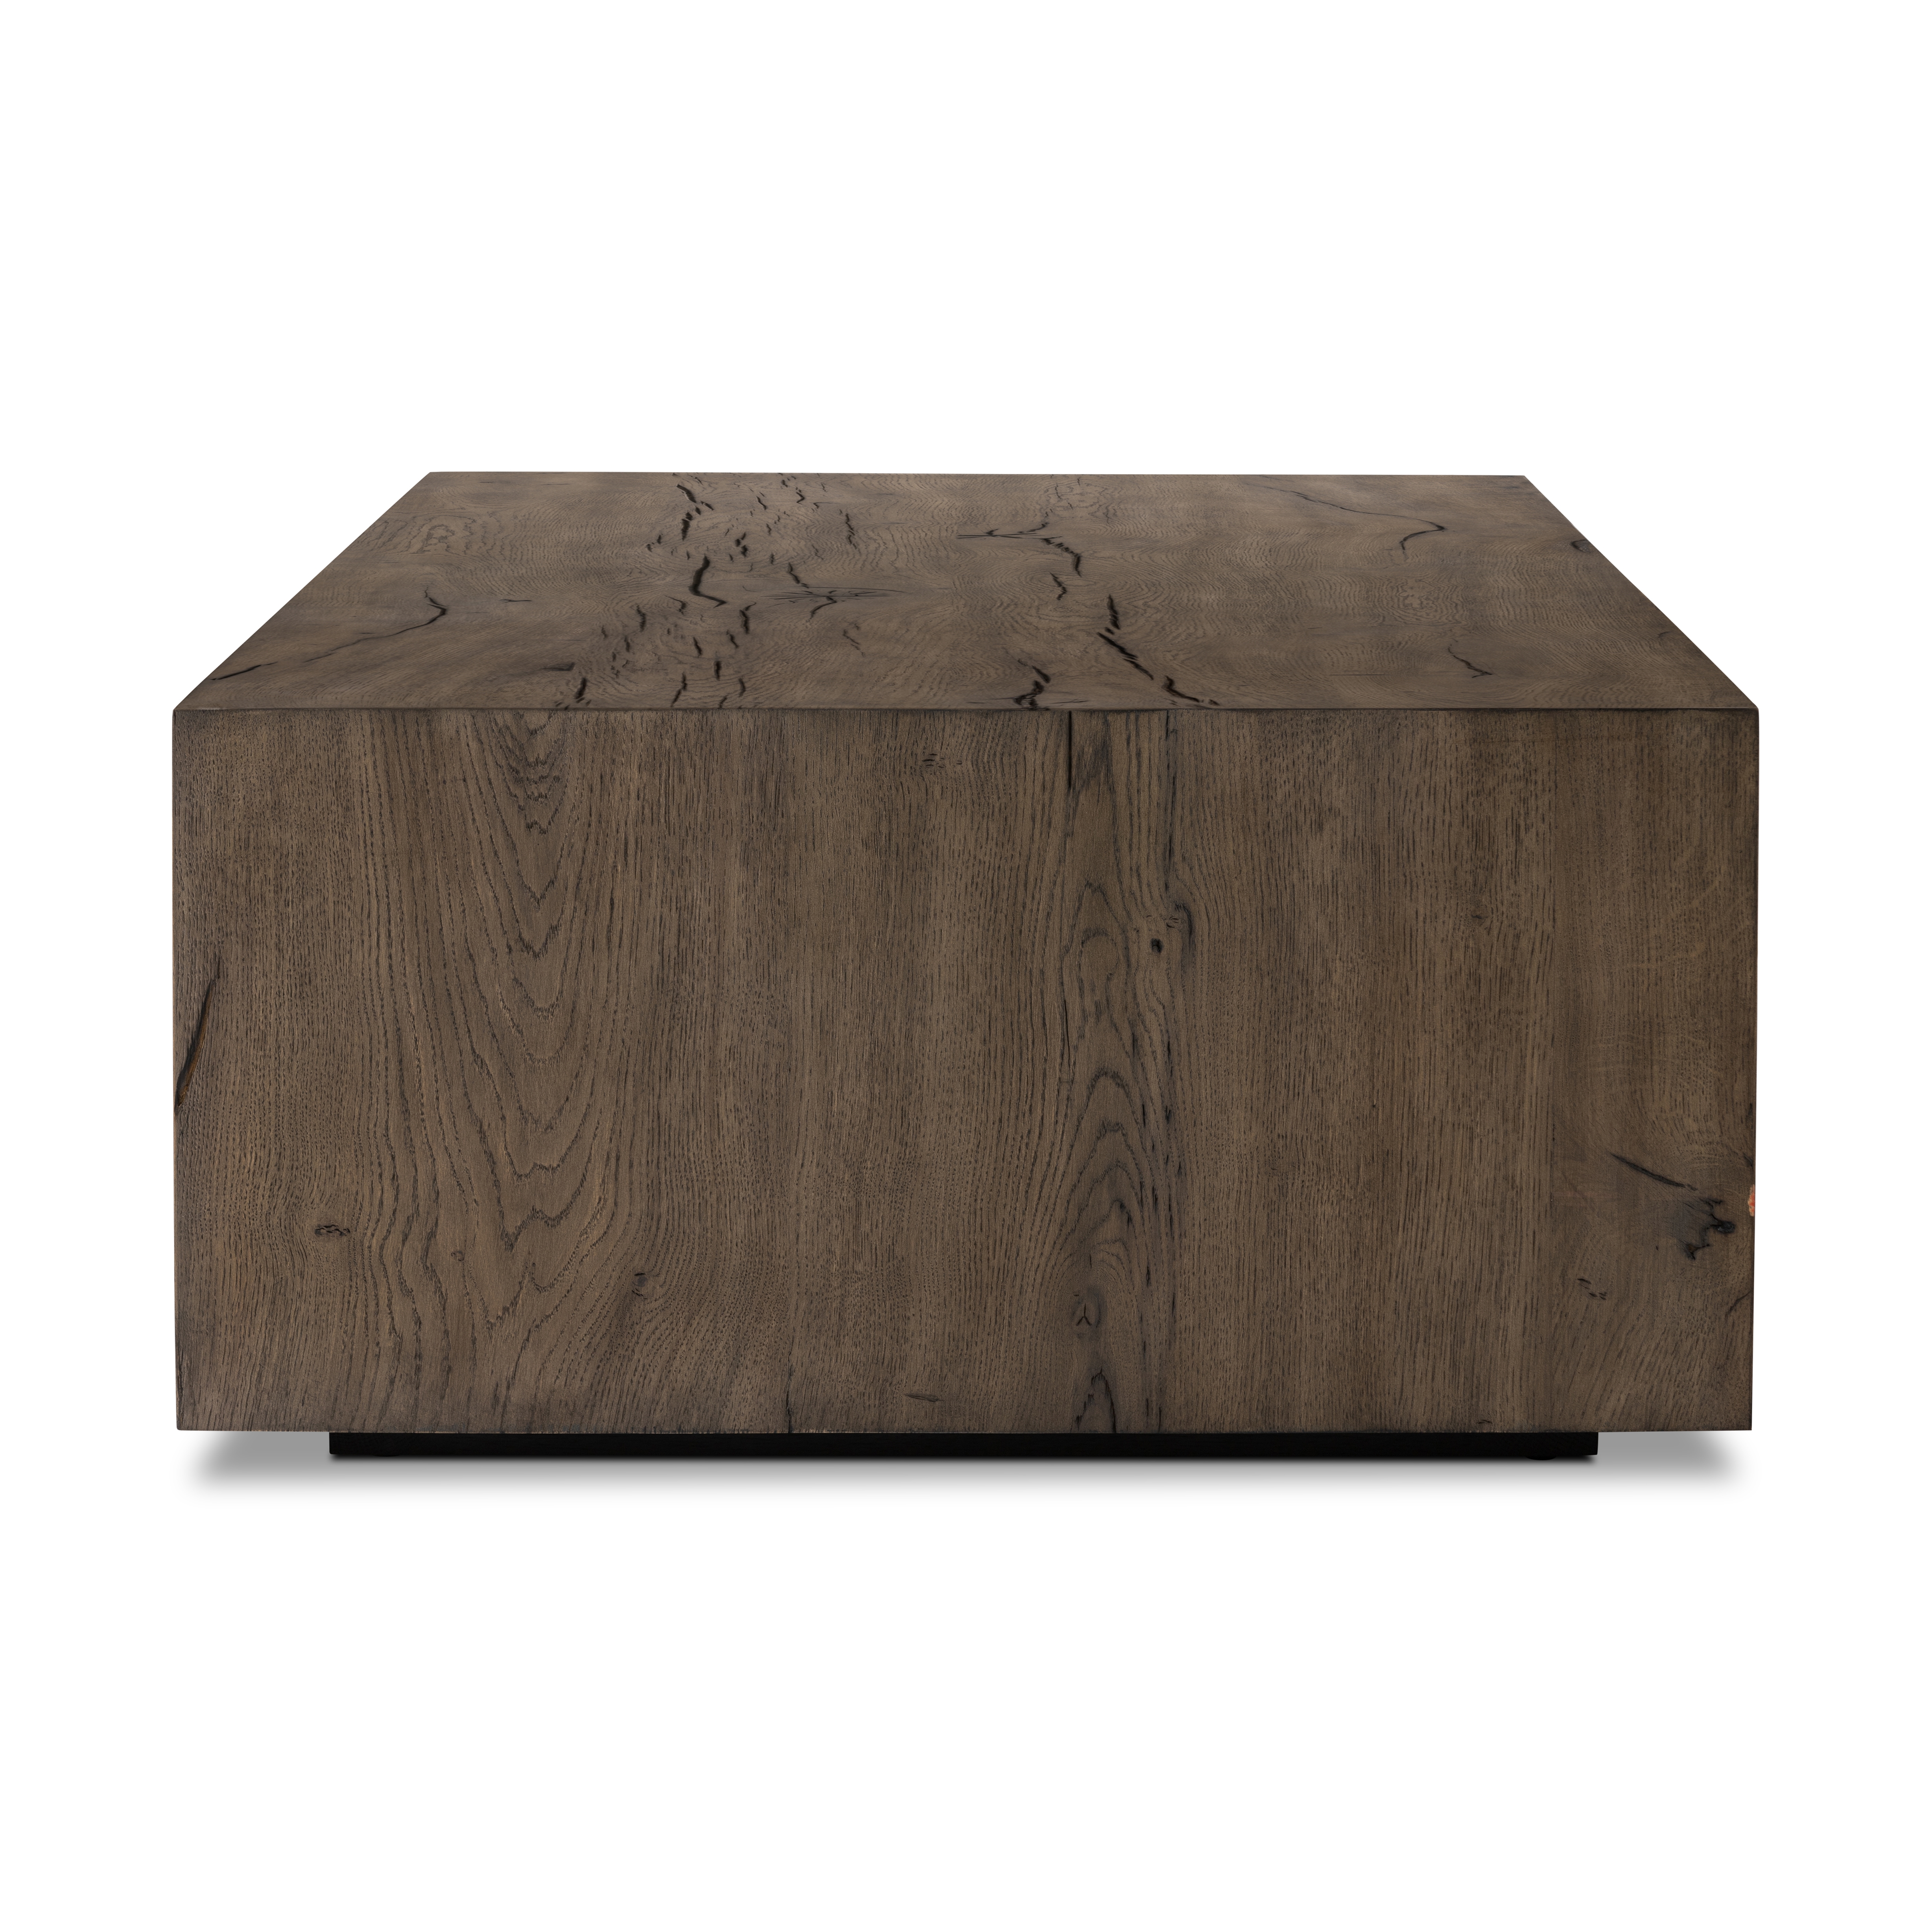 Odell Coffee Table-Grey Rclmd French Oak - Image 4